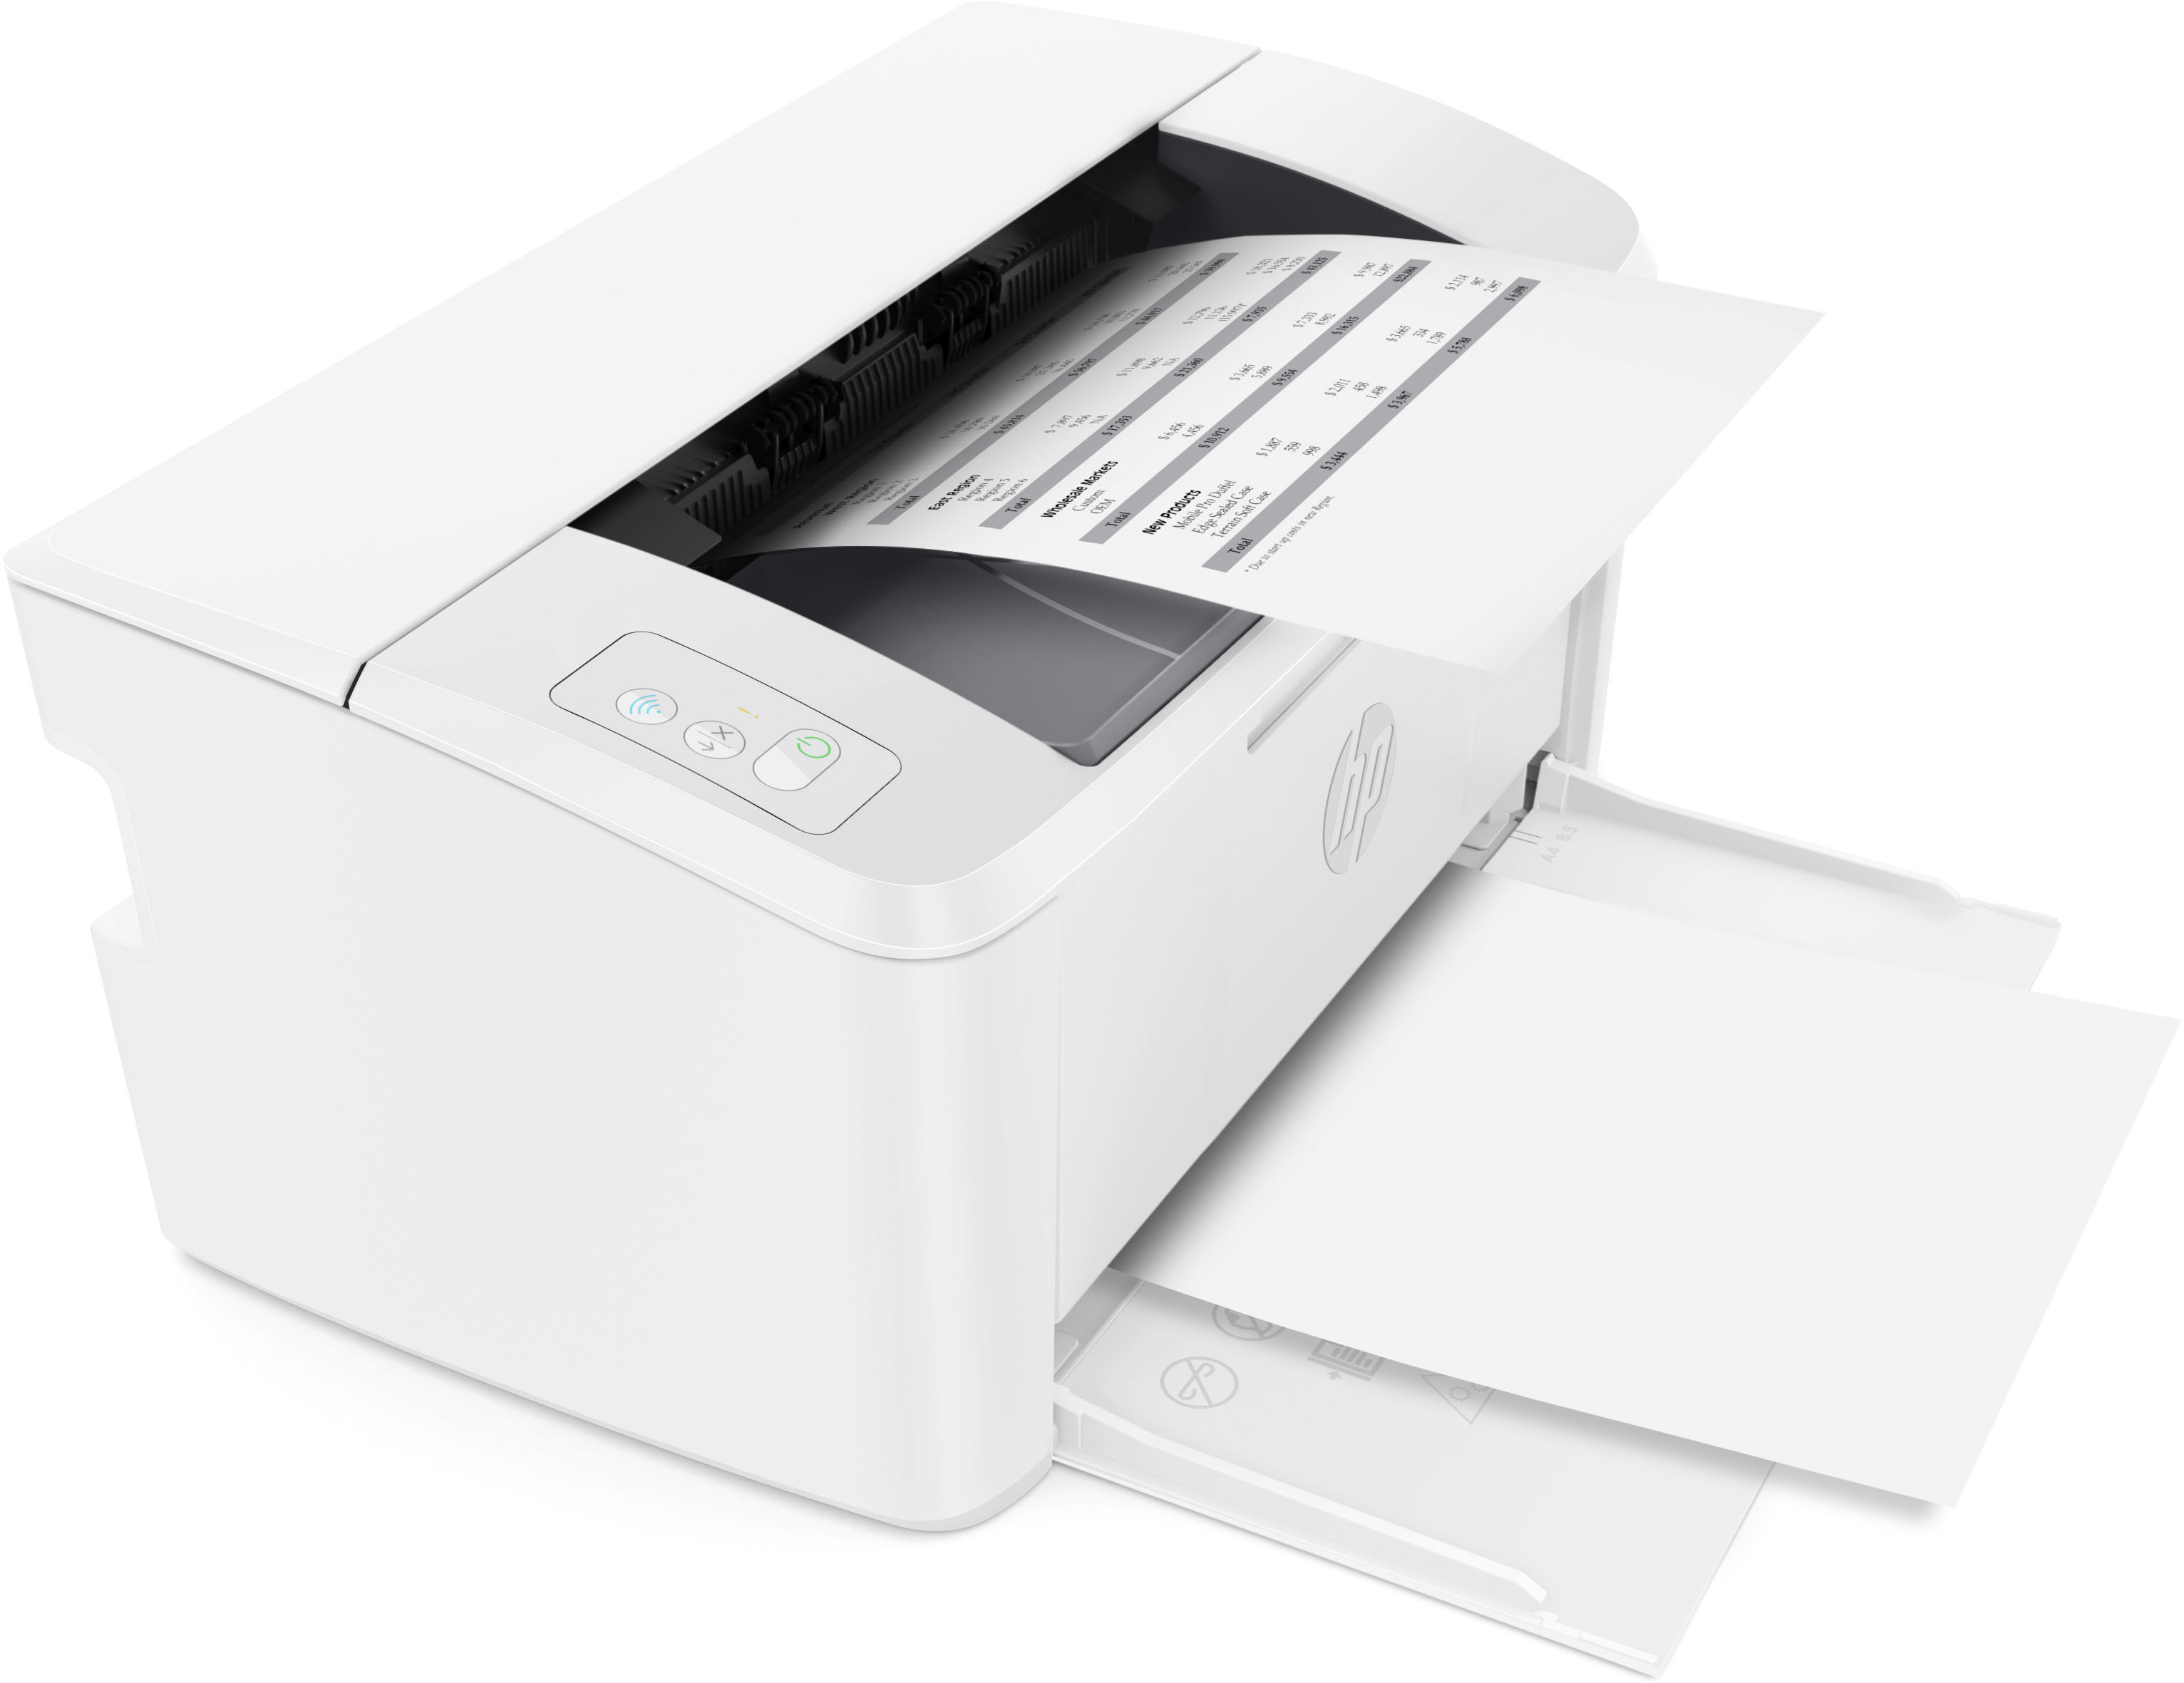 HP LaserJet M110we of months with White Laser - Buy LaserJet 6 Best White Ink HP+ with and Black M110we Printer Instant included Wireless